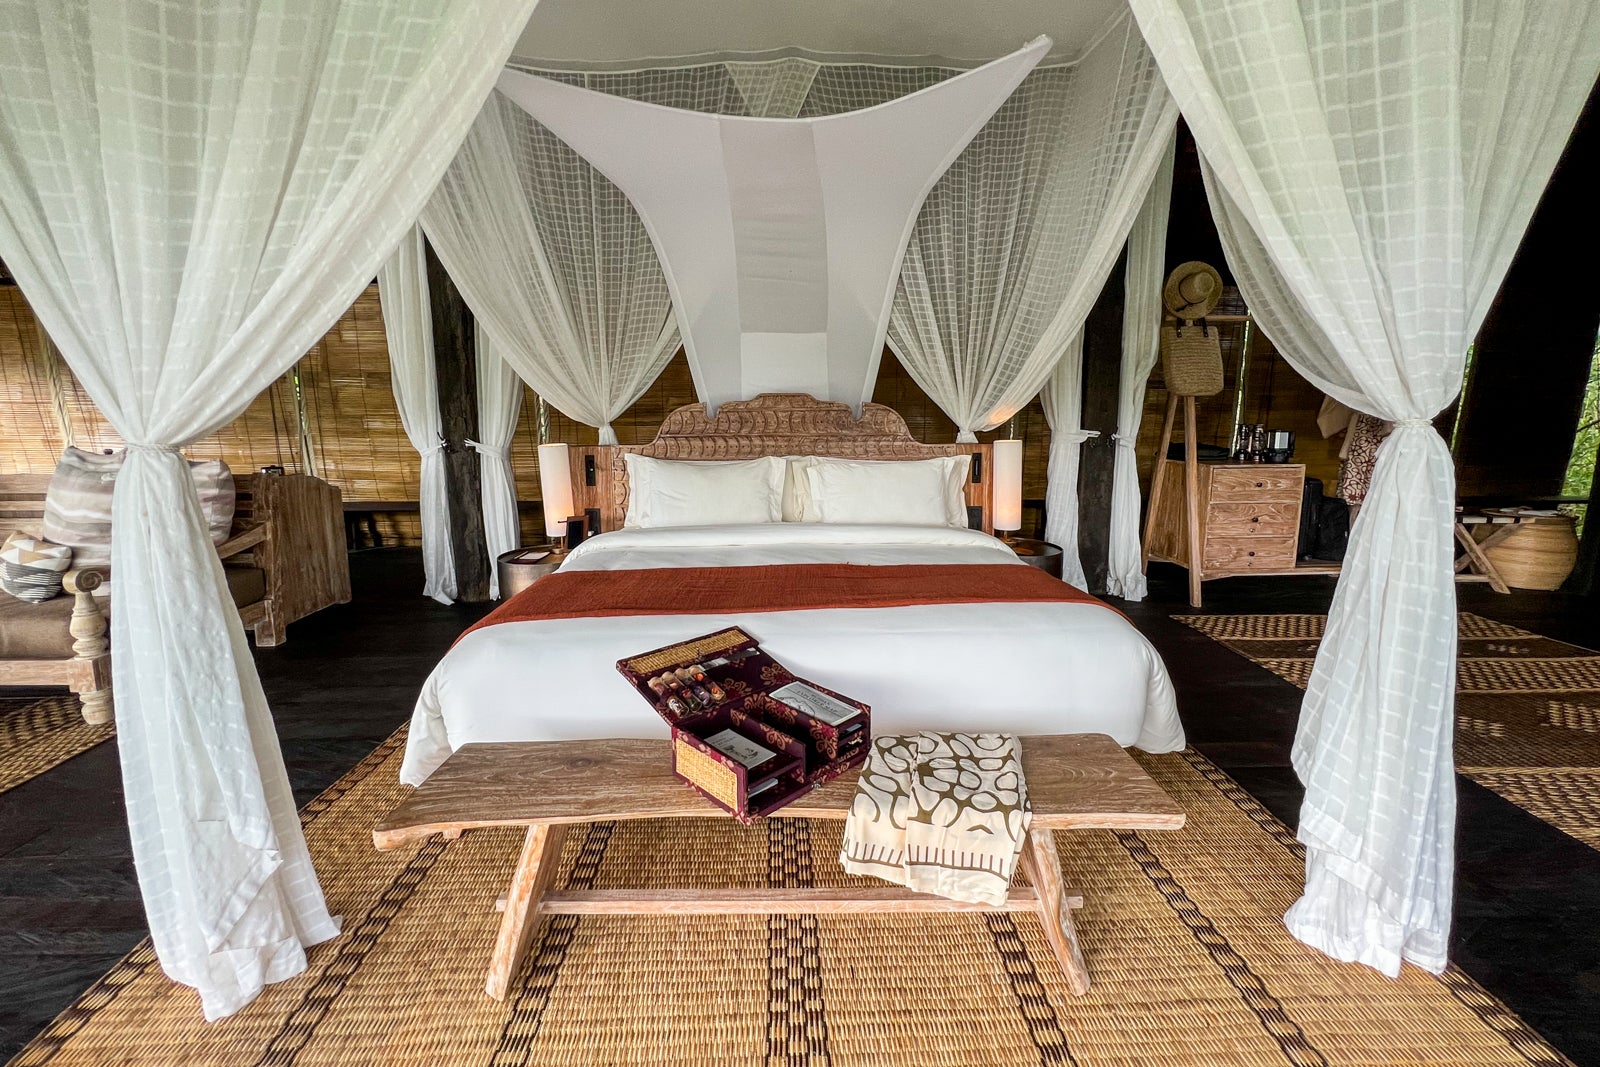 Inside Buahan, Banyan Tree's first ever Escape resort in Bali